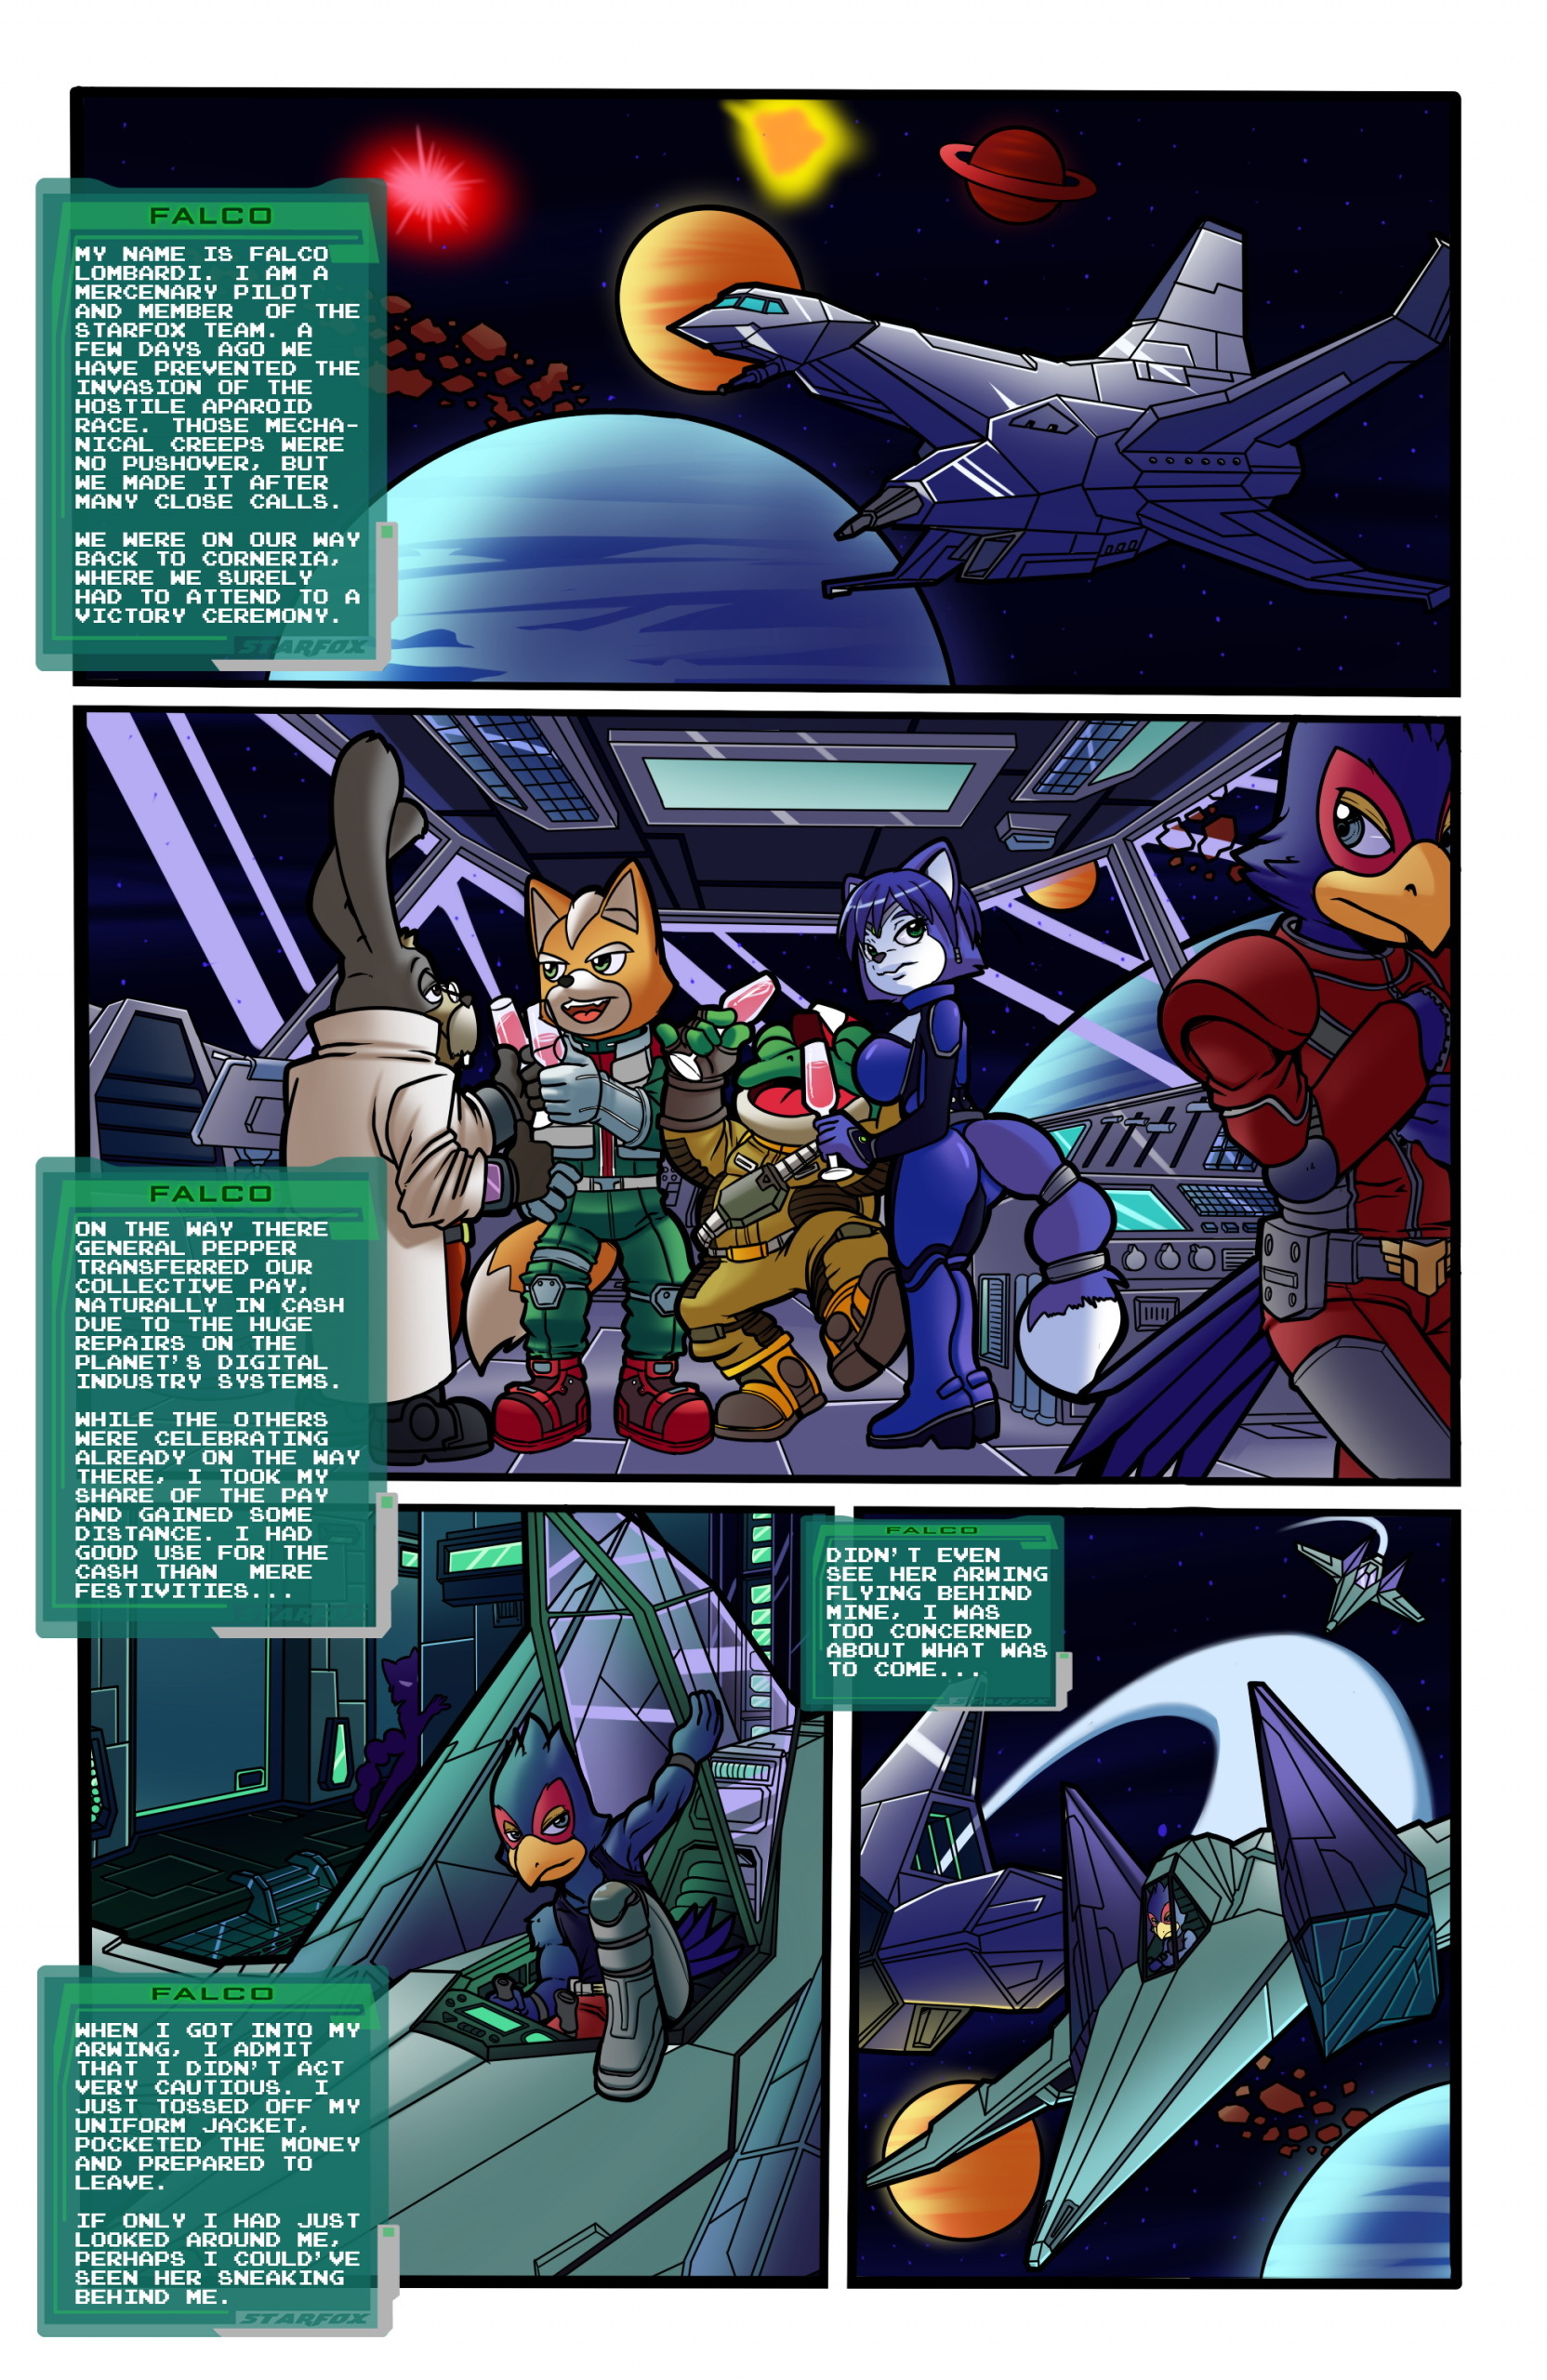 Assault and Flattery - Page 1